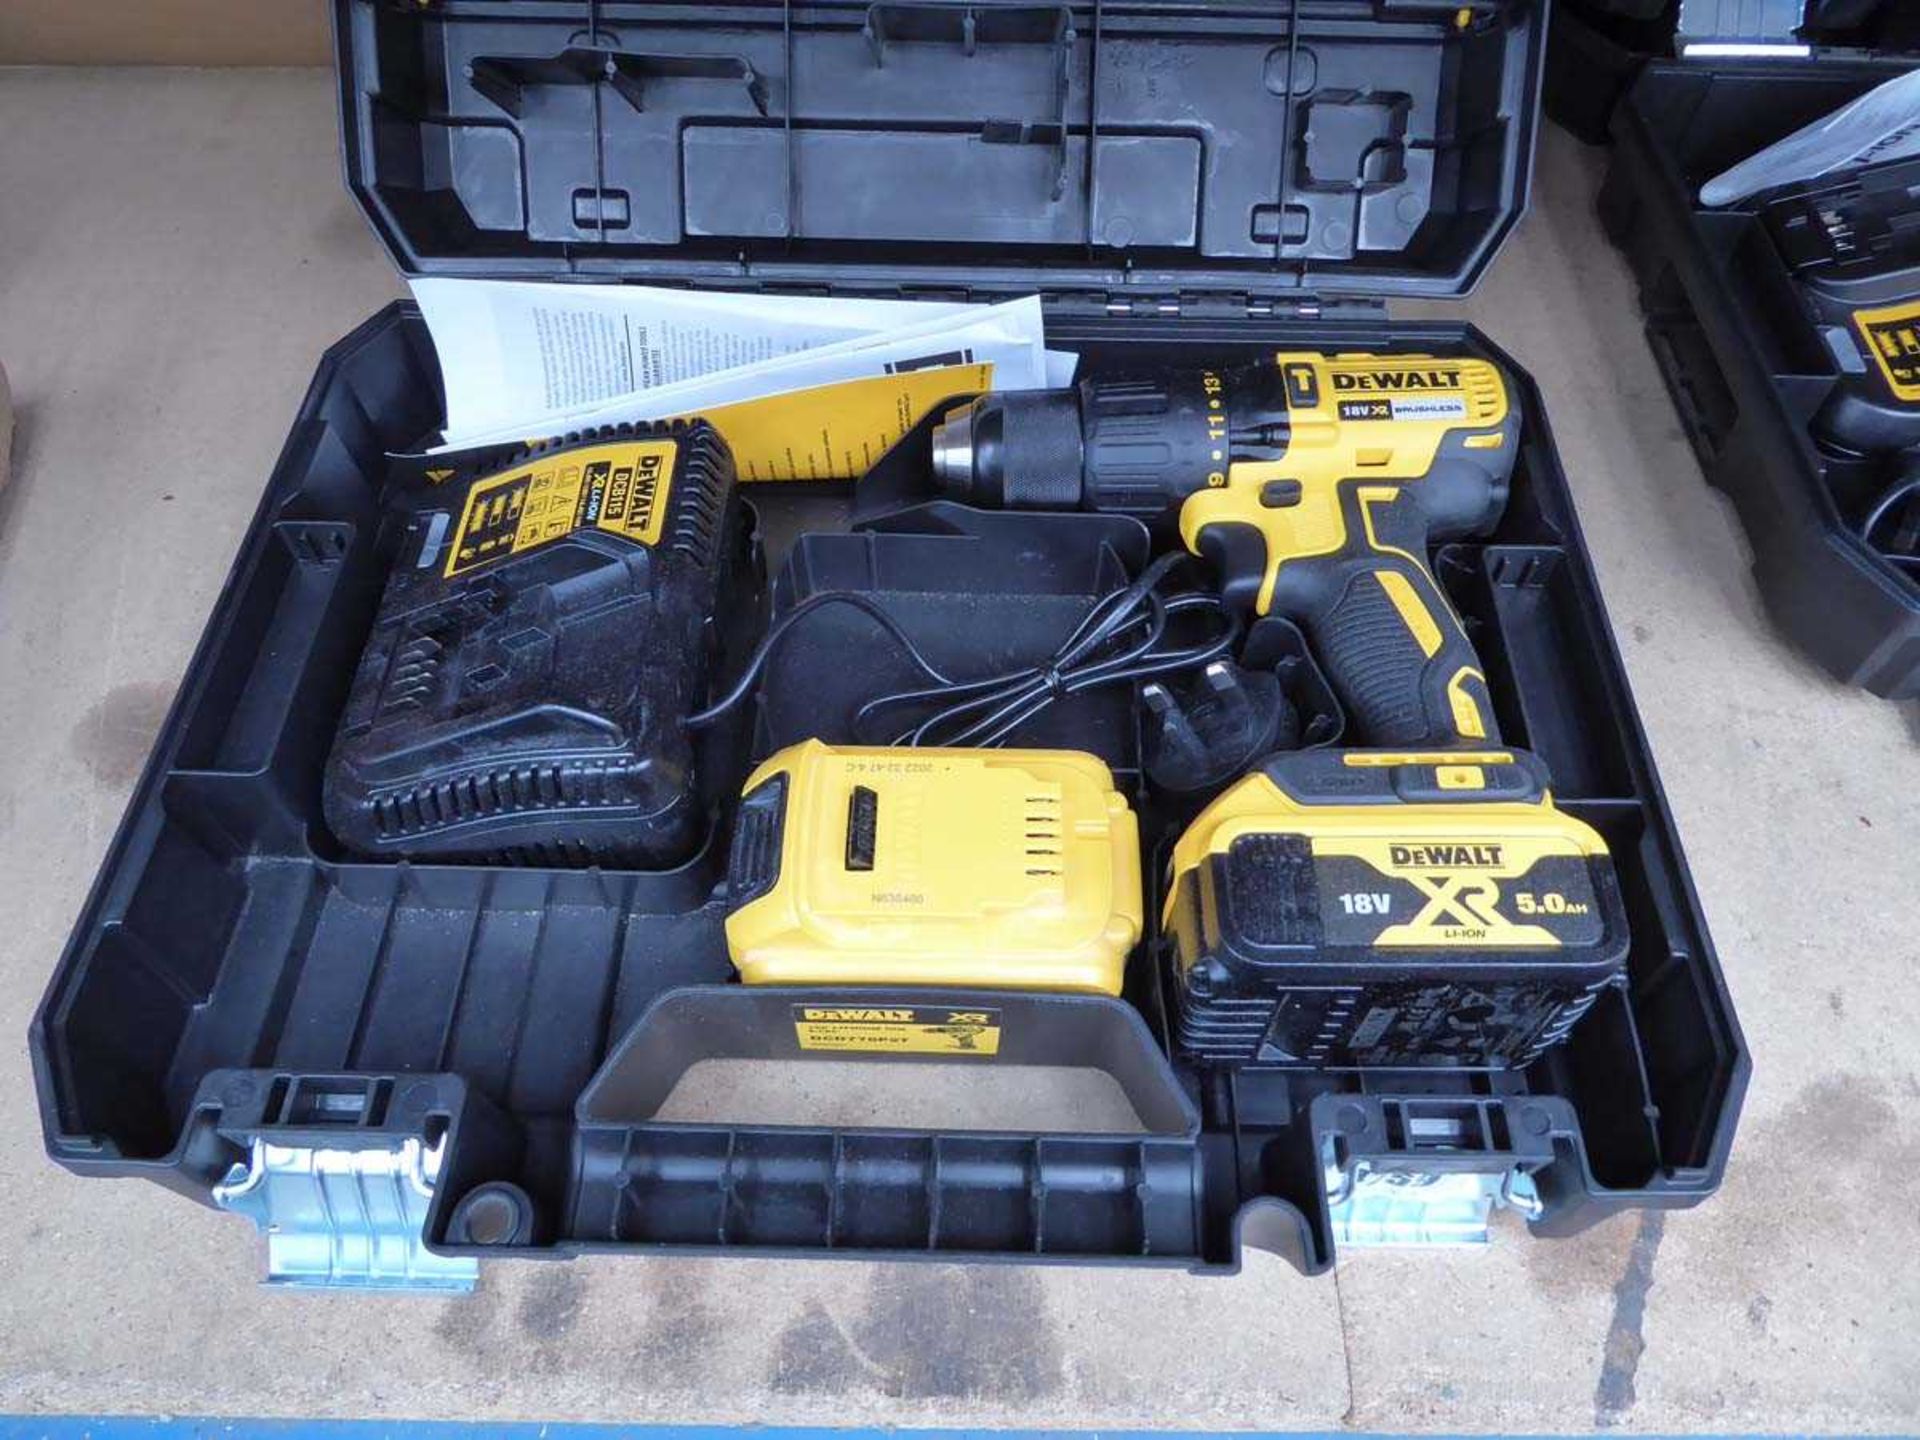 Dewalt 18v battery drill complete with 2 batteries and charger